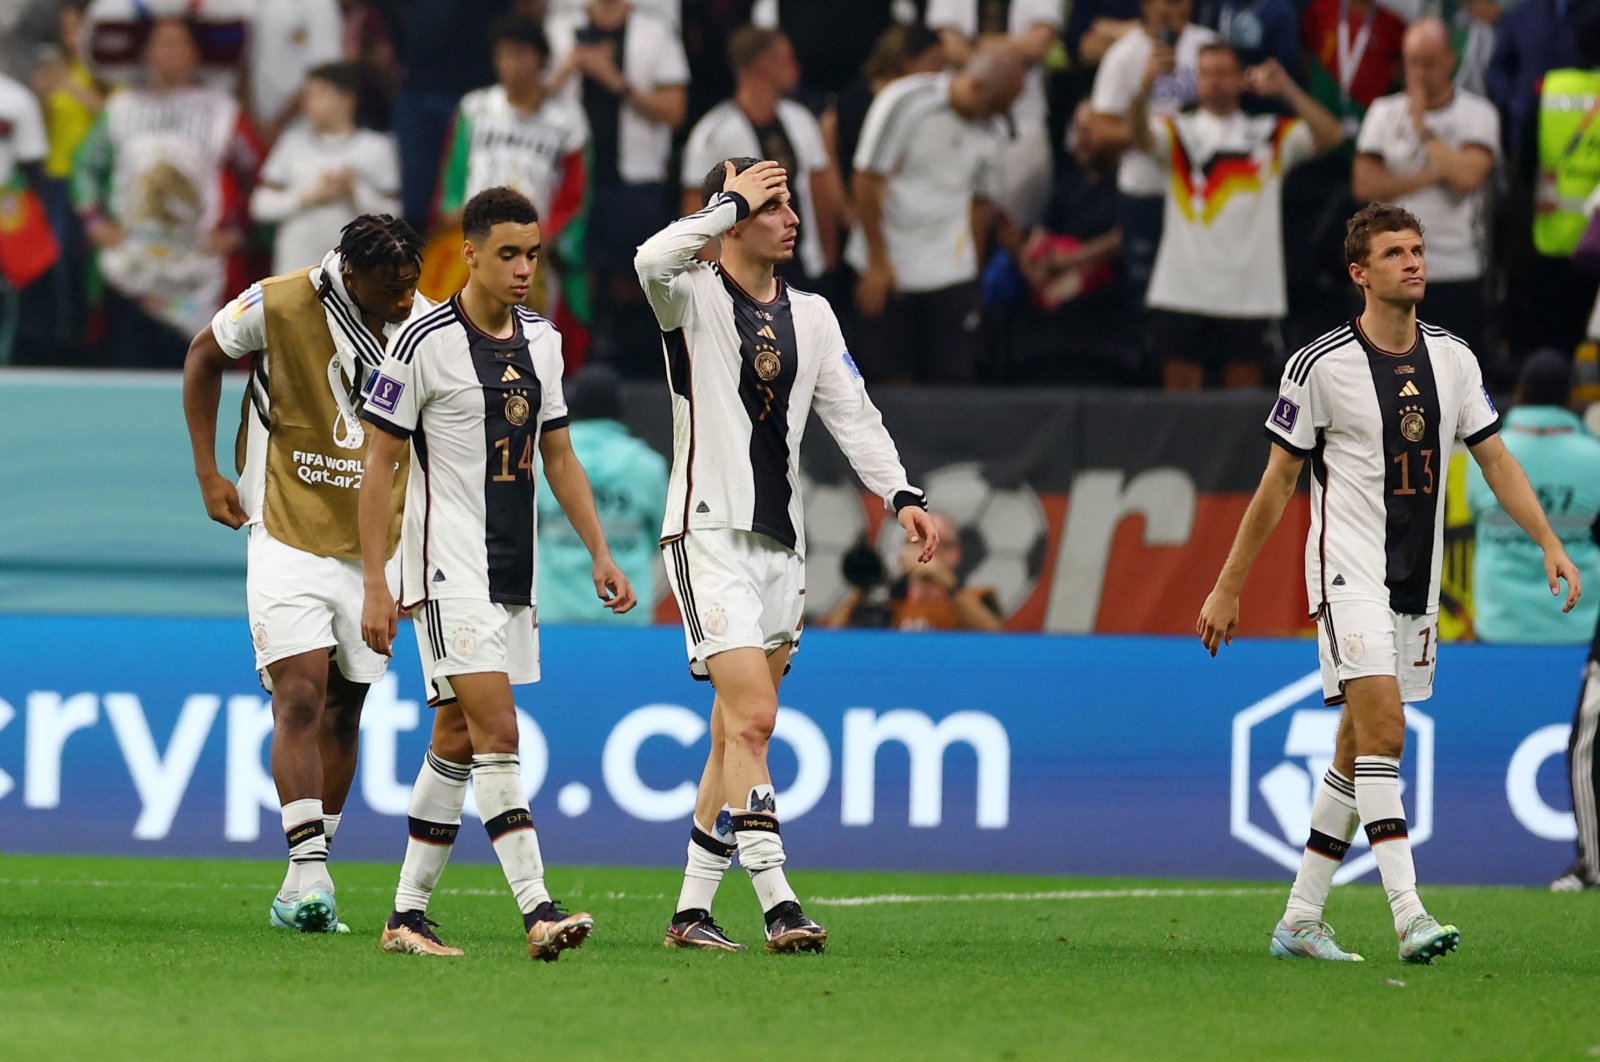 Germany&#039;s Jamal Musiala, Kai Havertz and Thomas Muller look dejected as Germany are eliminated from the World Cup after their Group E match against Costa Rica at the Al Bayt Stadium in Al Khor, Qatar, Dec. 1, 2022. (Reuters Photo)